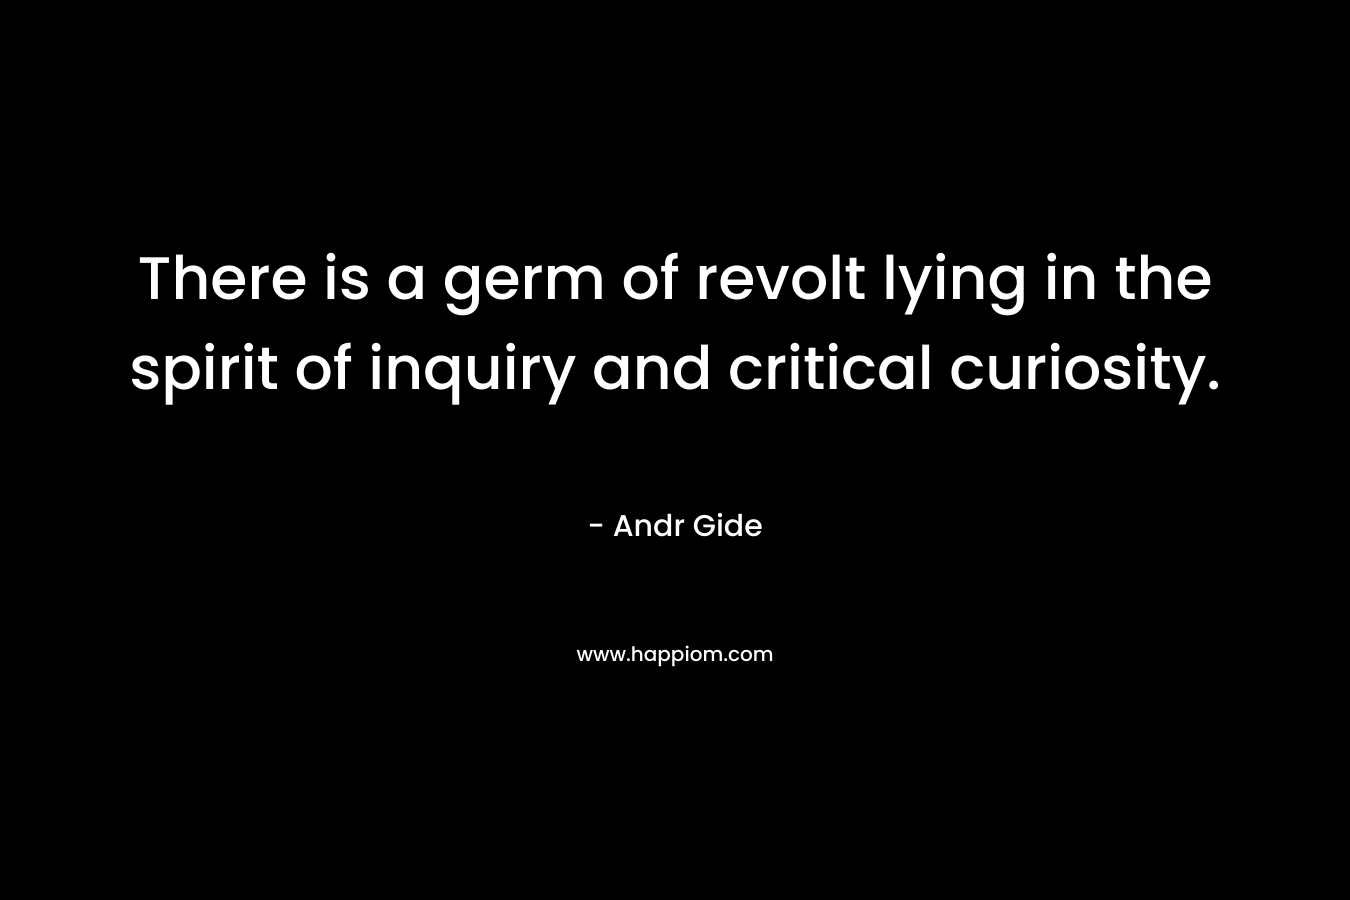 There is a germ of revolt lying in the spirit of inquiry and critical curiosity. – Andr Gide